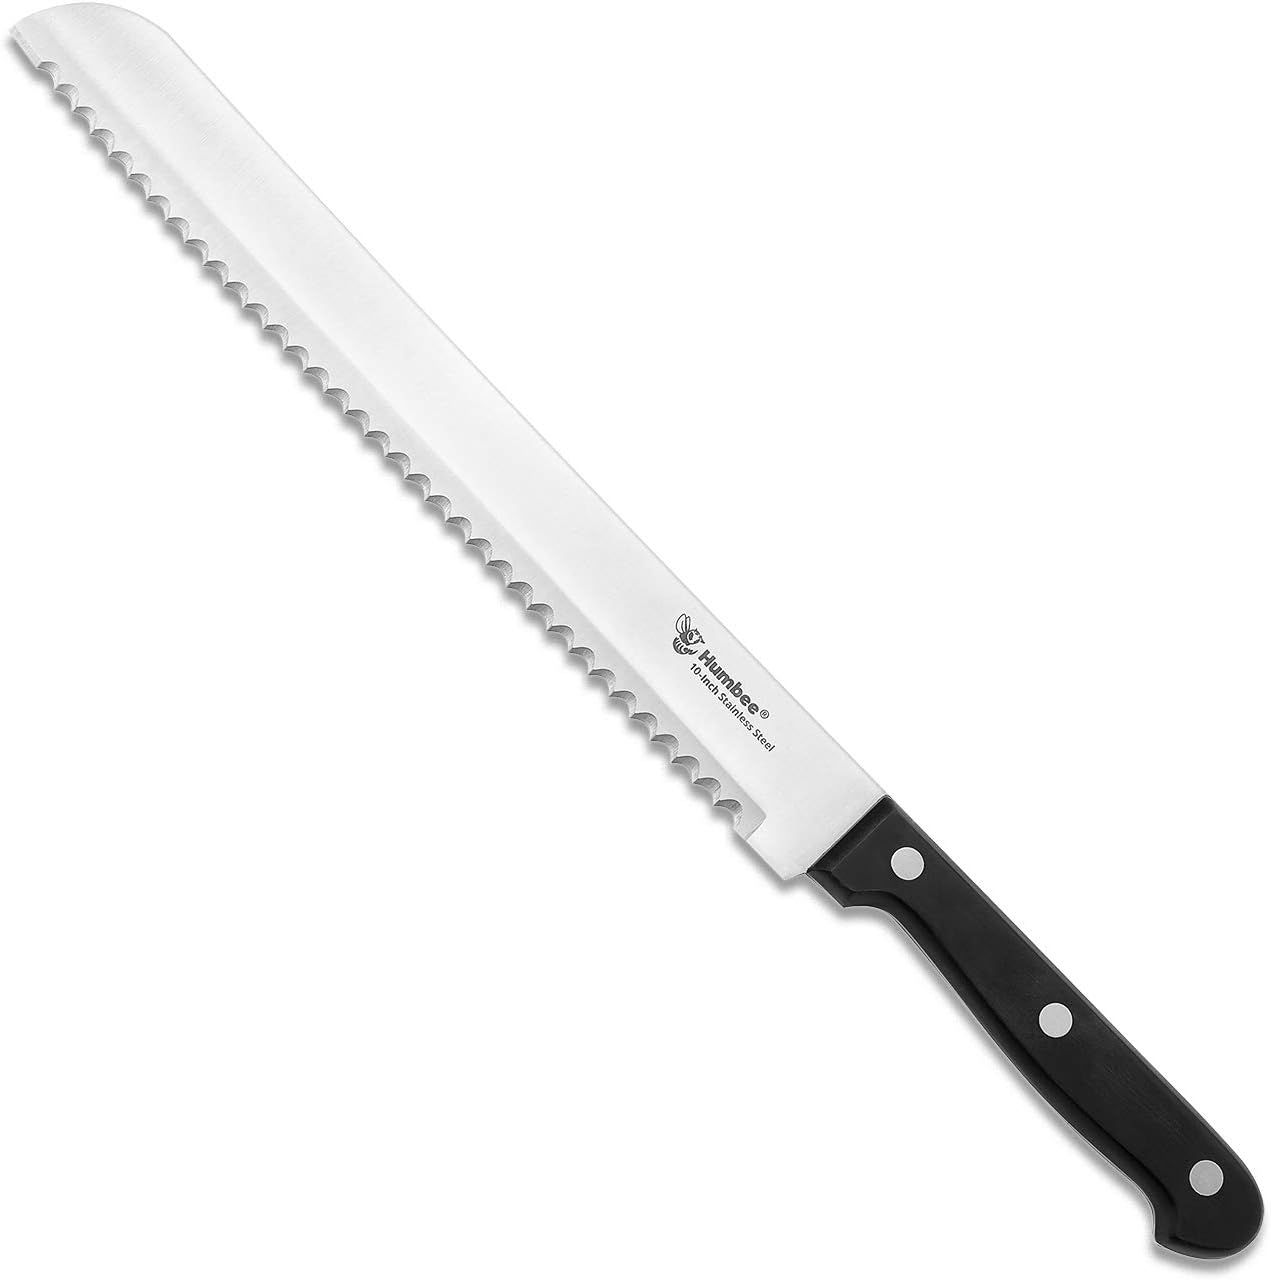 Humbee Chef Serrated Bread Knife For Home Kitchens 10 Inch Black | Amazon (US)